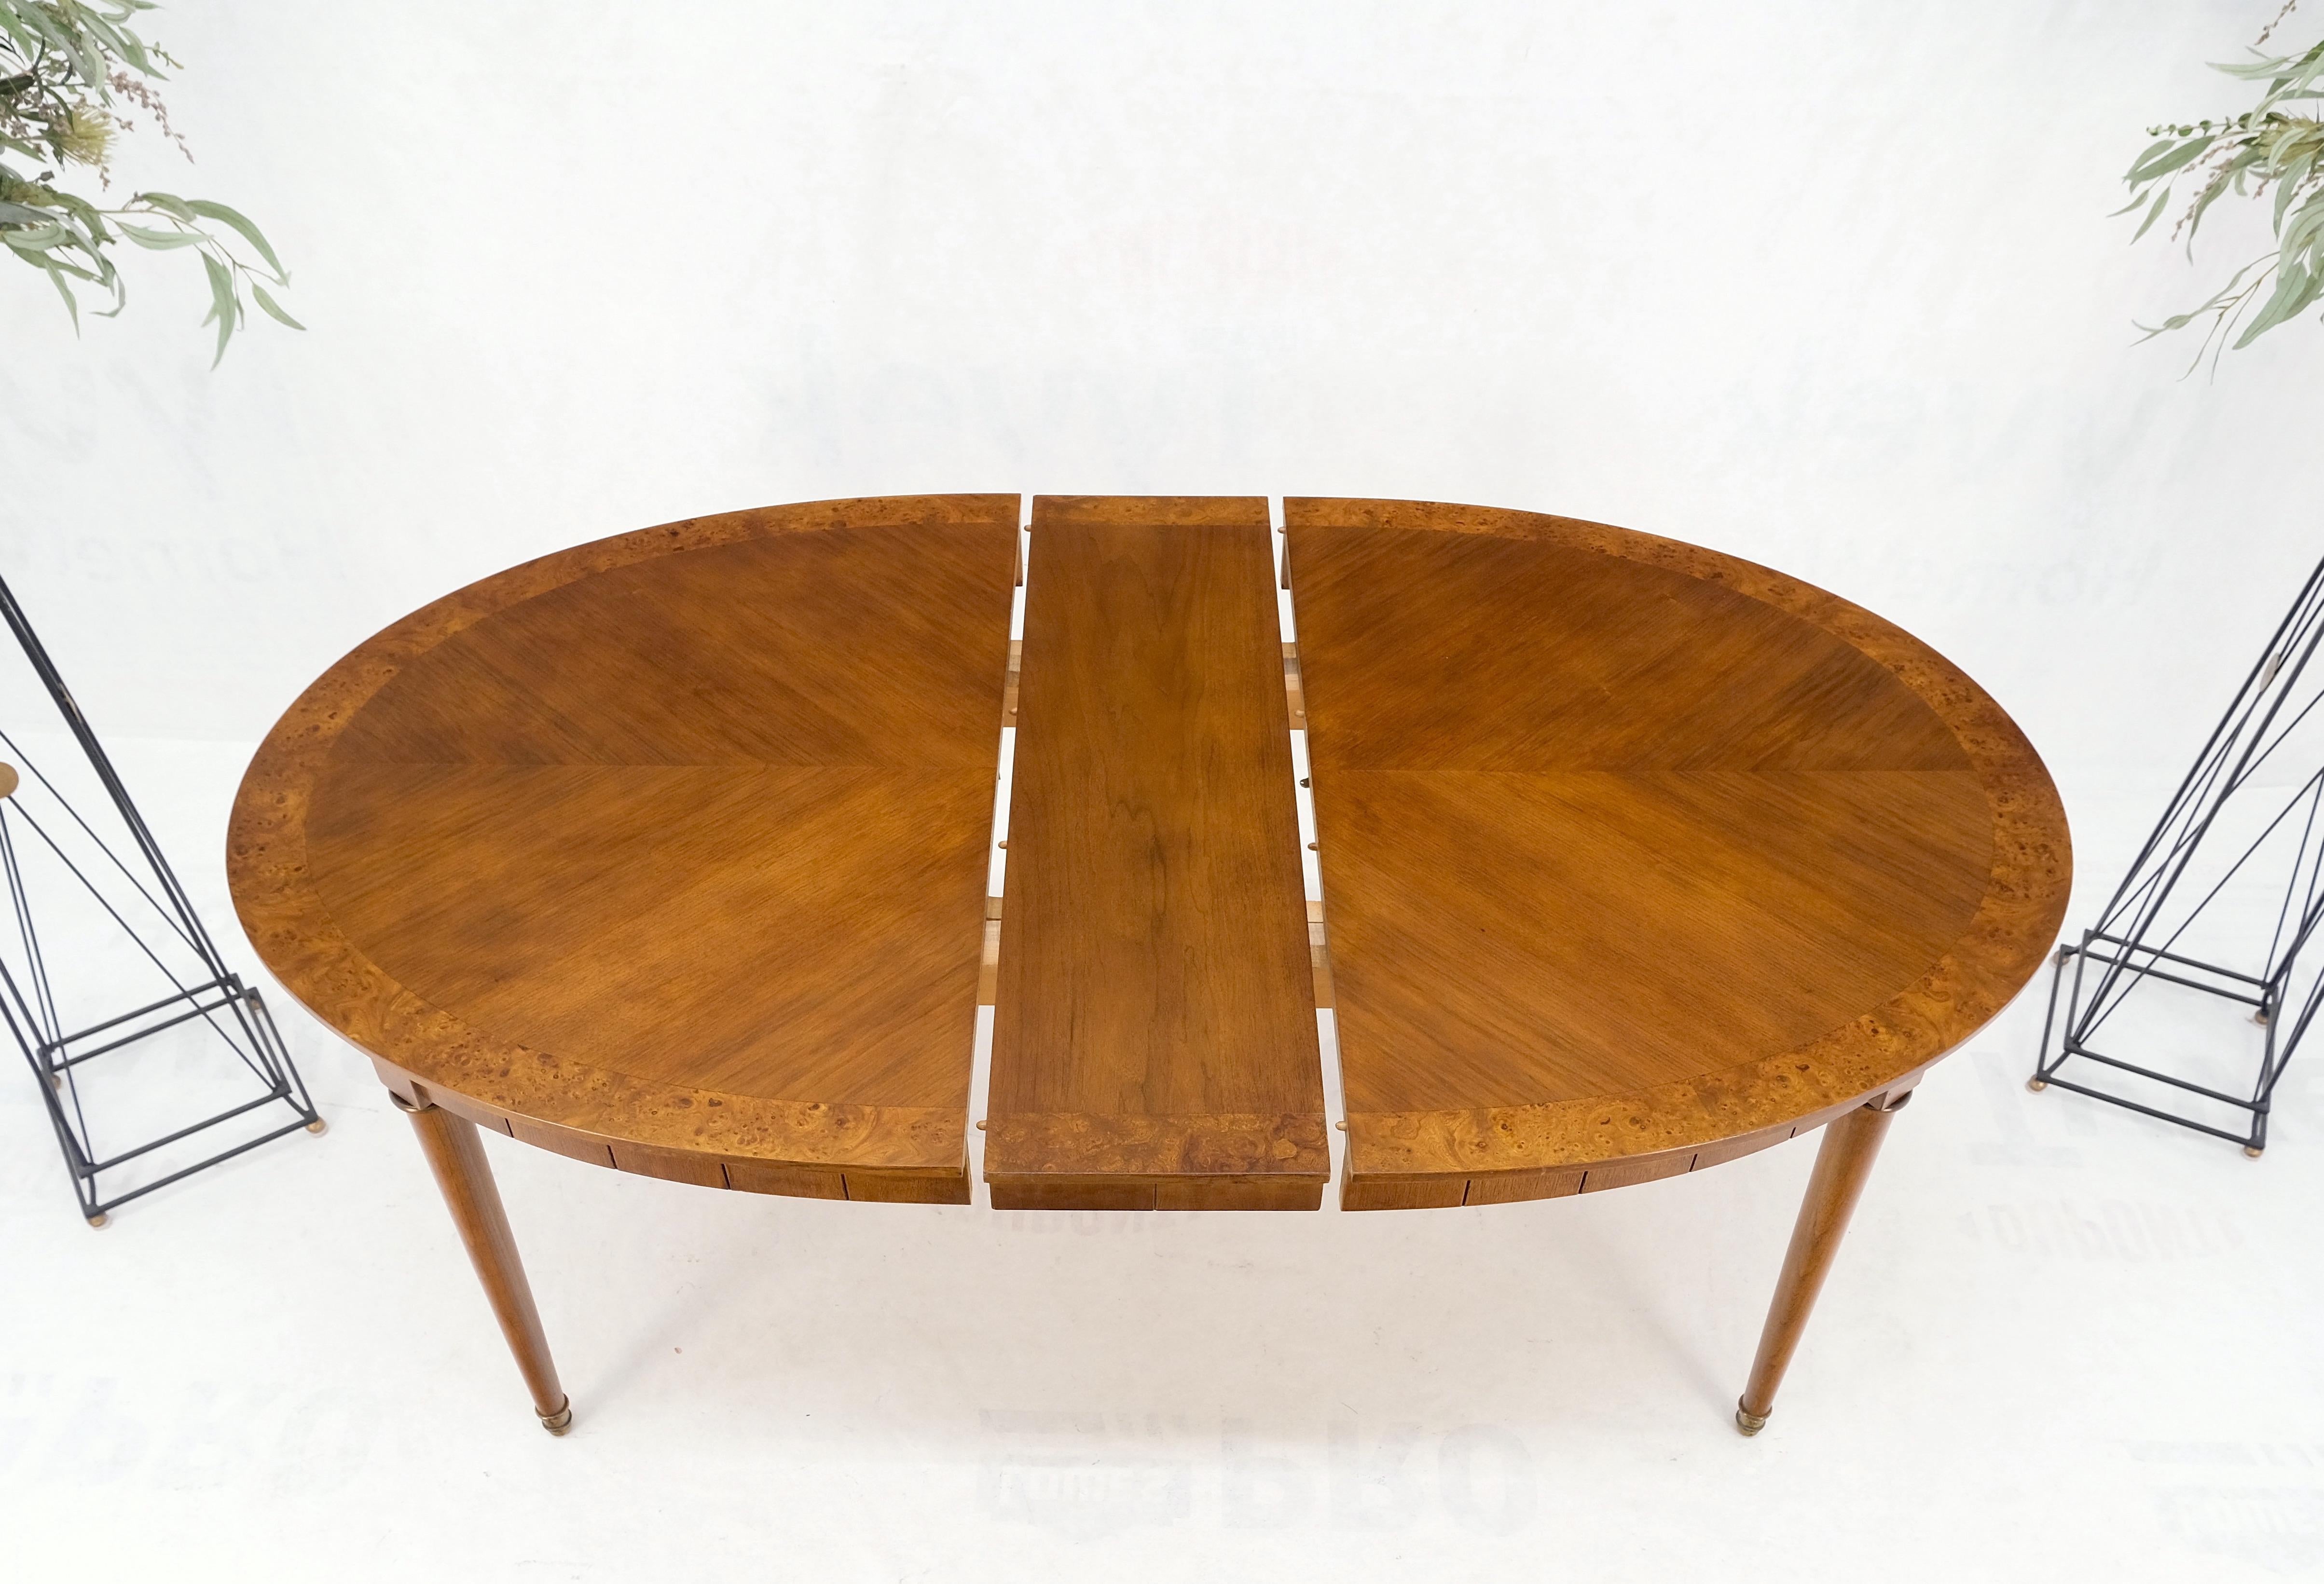 Mid-Century Modern Oval Banded Burl Wood Tapered Legs One Leaf Dining Table Mint In Good Condition For Sale In Rockaway, NJ